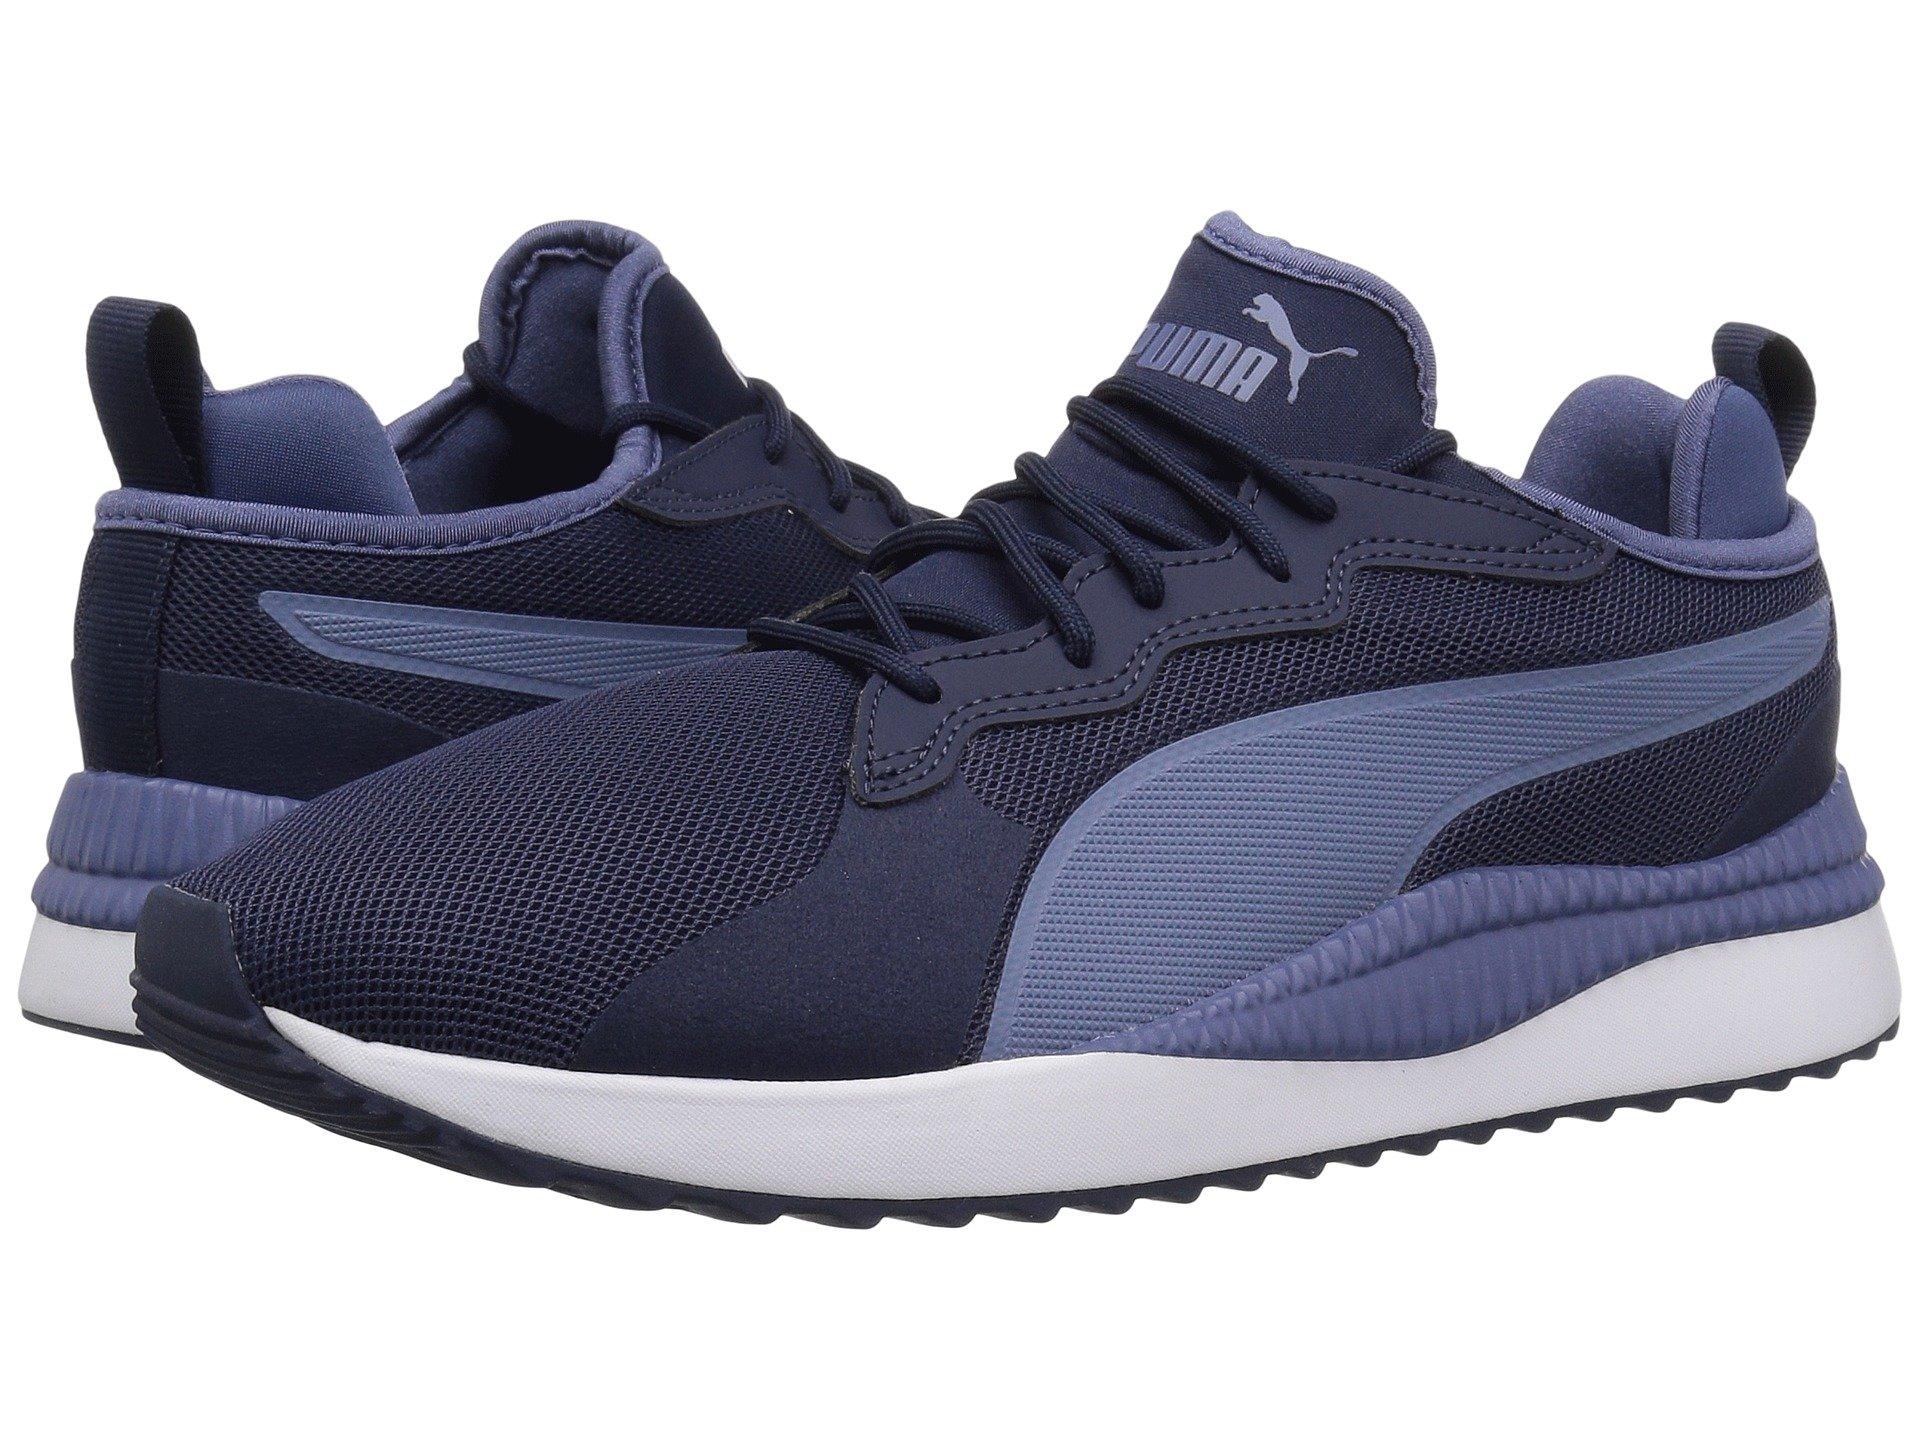 Puma Pacer Next, Peacoat/infinity/blue 